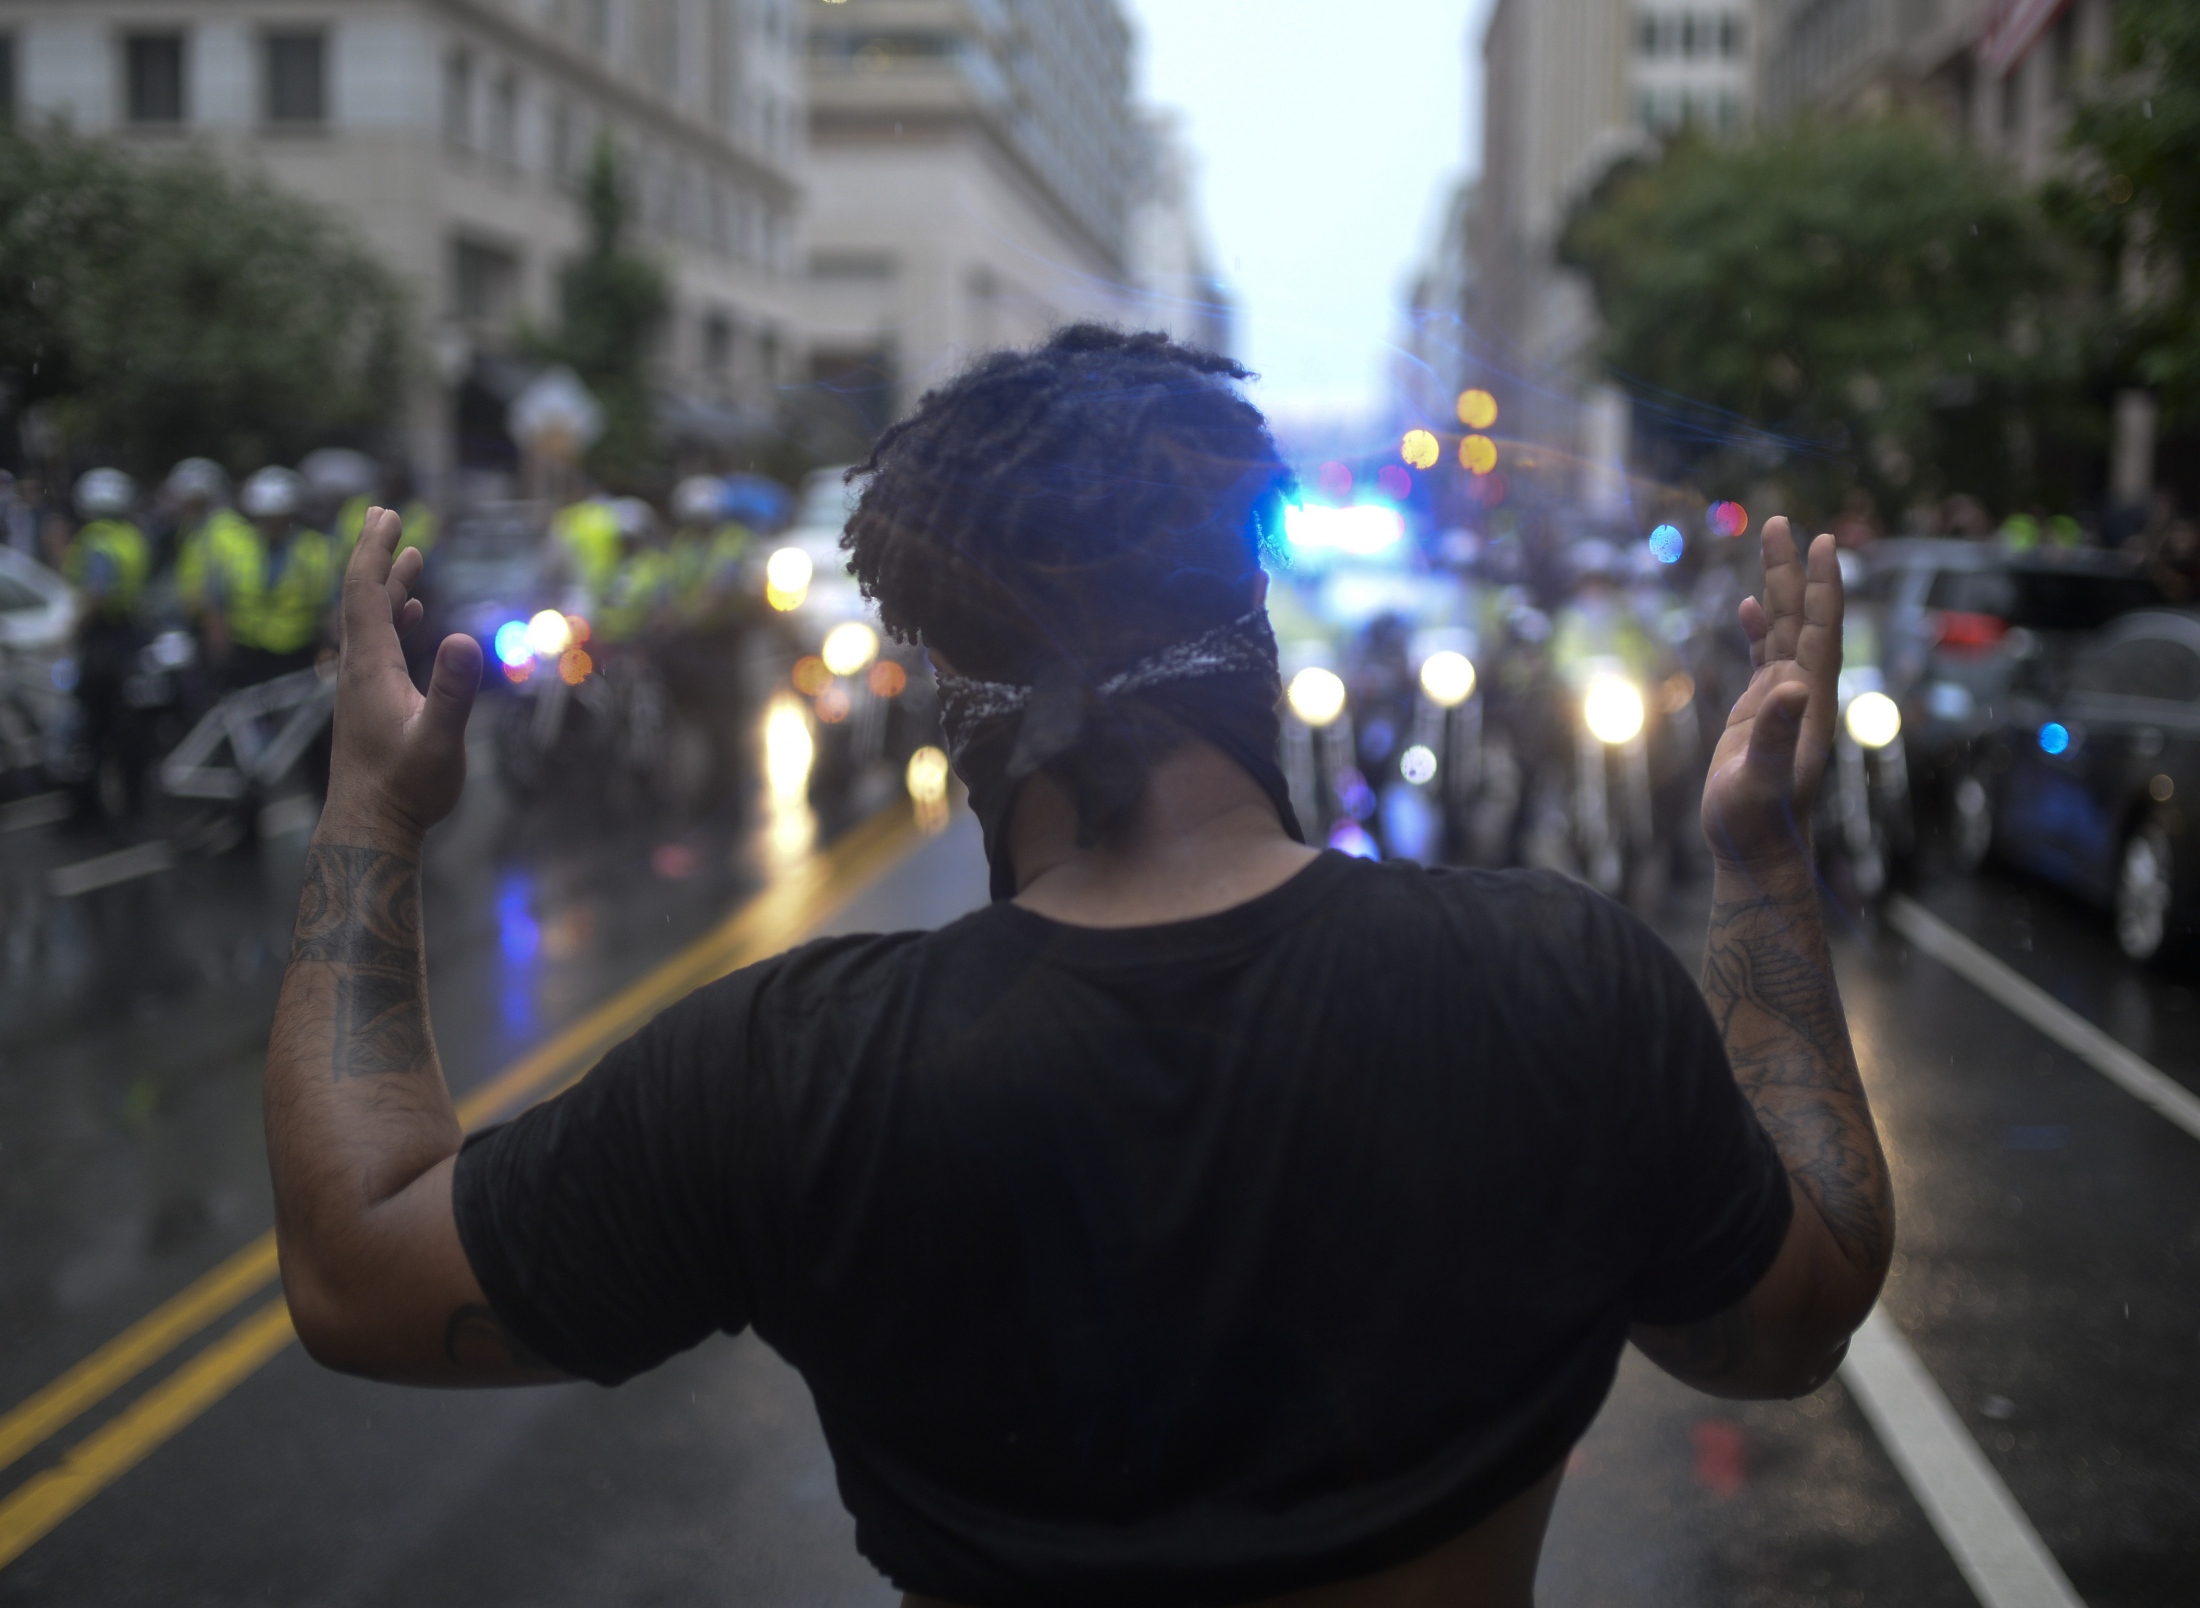  A member of Black Lives Matter shouts at police forces after they barricaded streets preventing their movement and proceeded to spray tear gas. Black Lives Matter and Anti-Fascist protestors outnumbered the Unite the Right rallies as both groups commemorated the Charlottesville protest.in Washington DC. 